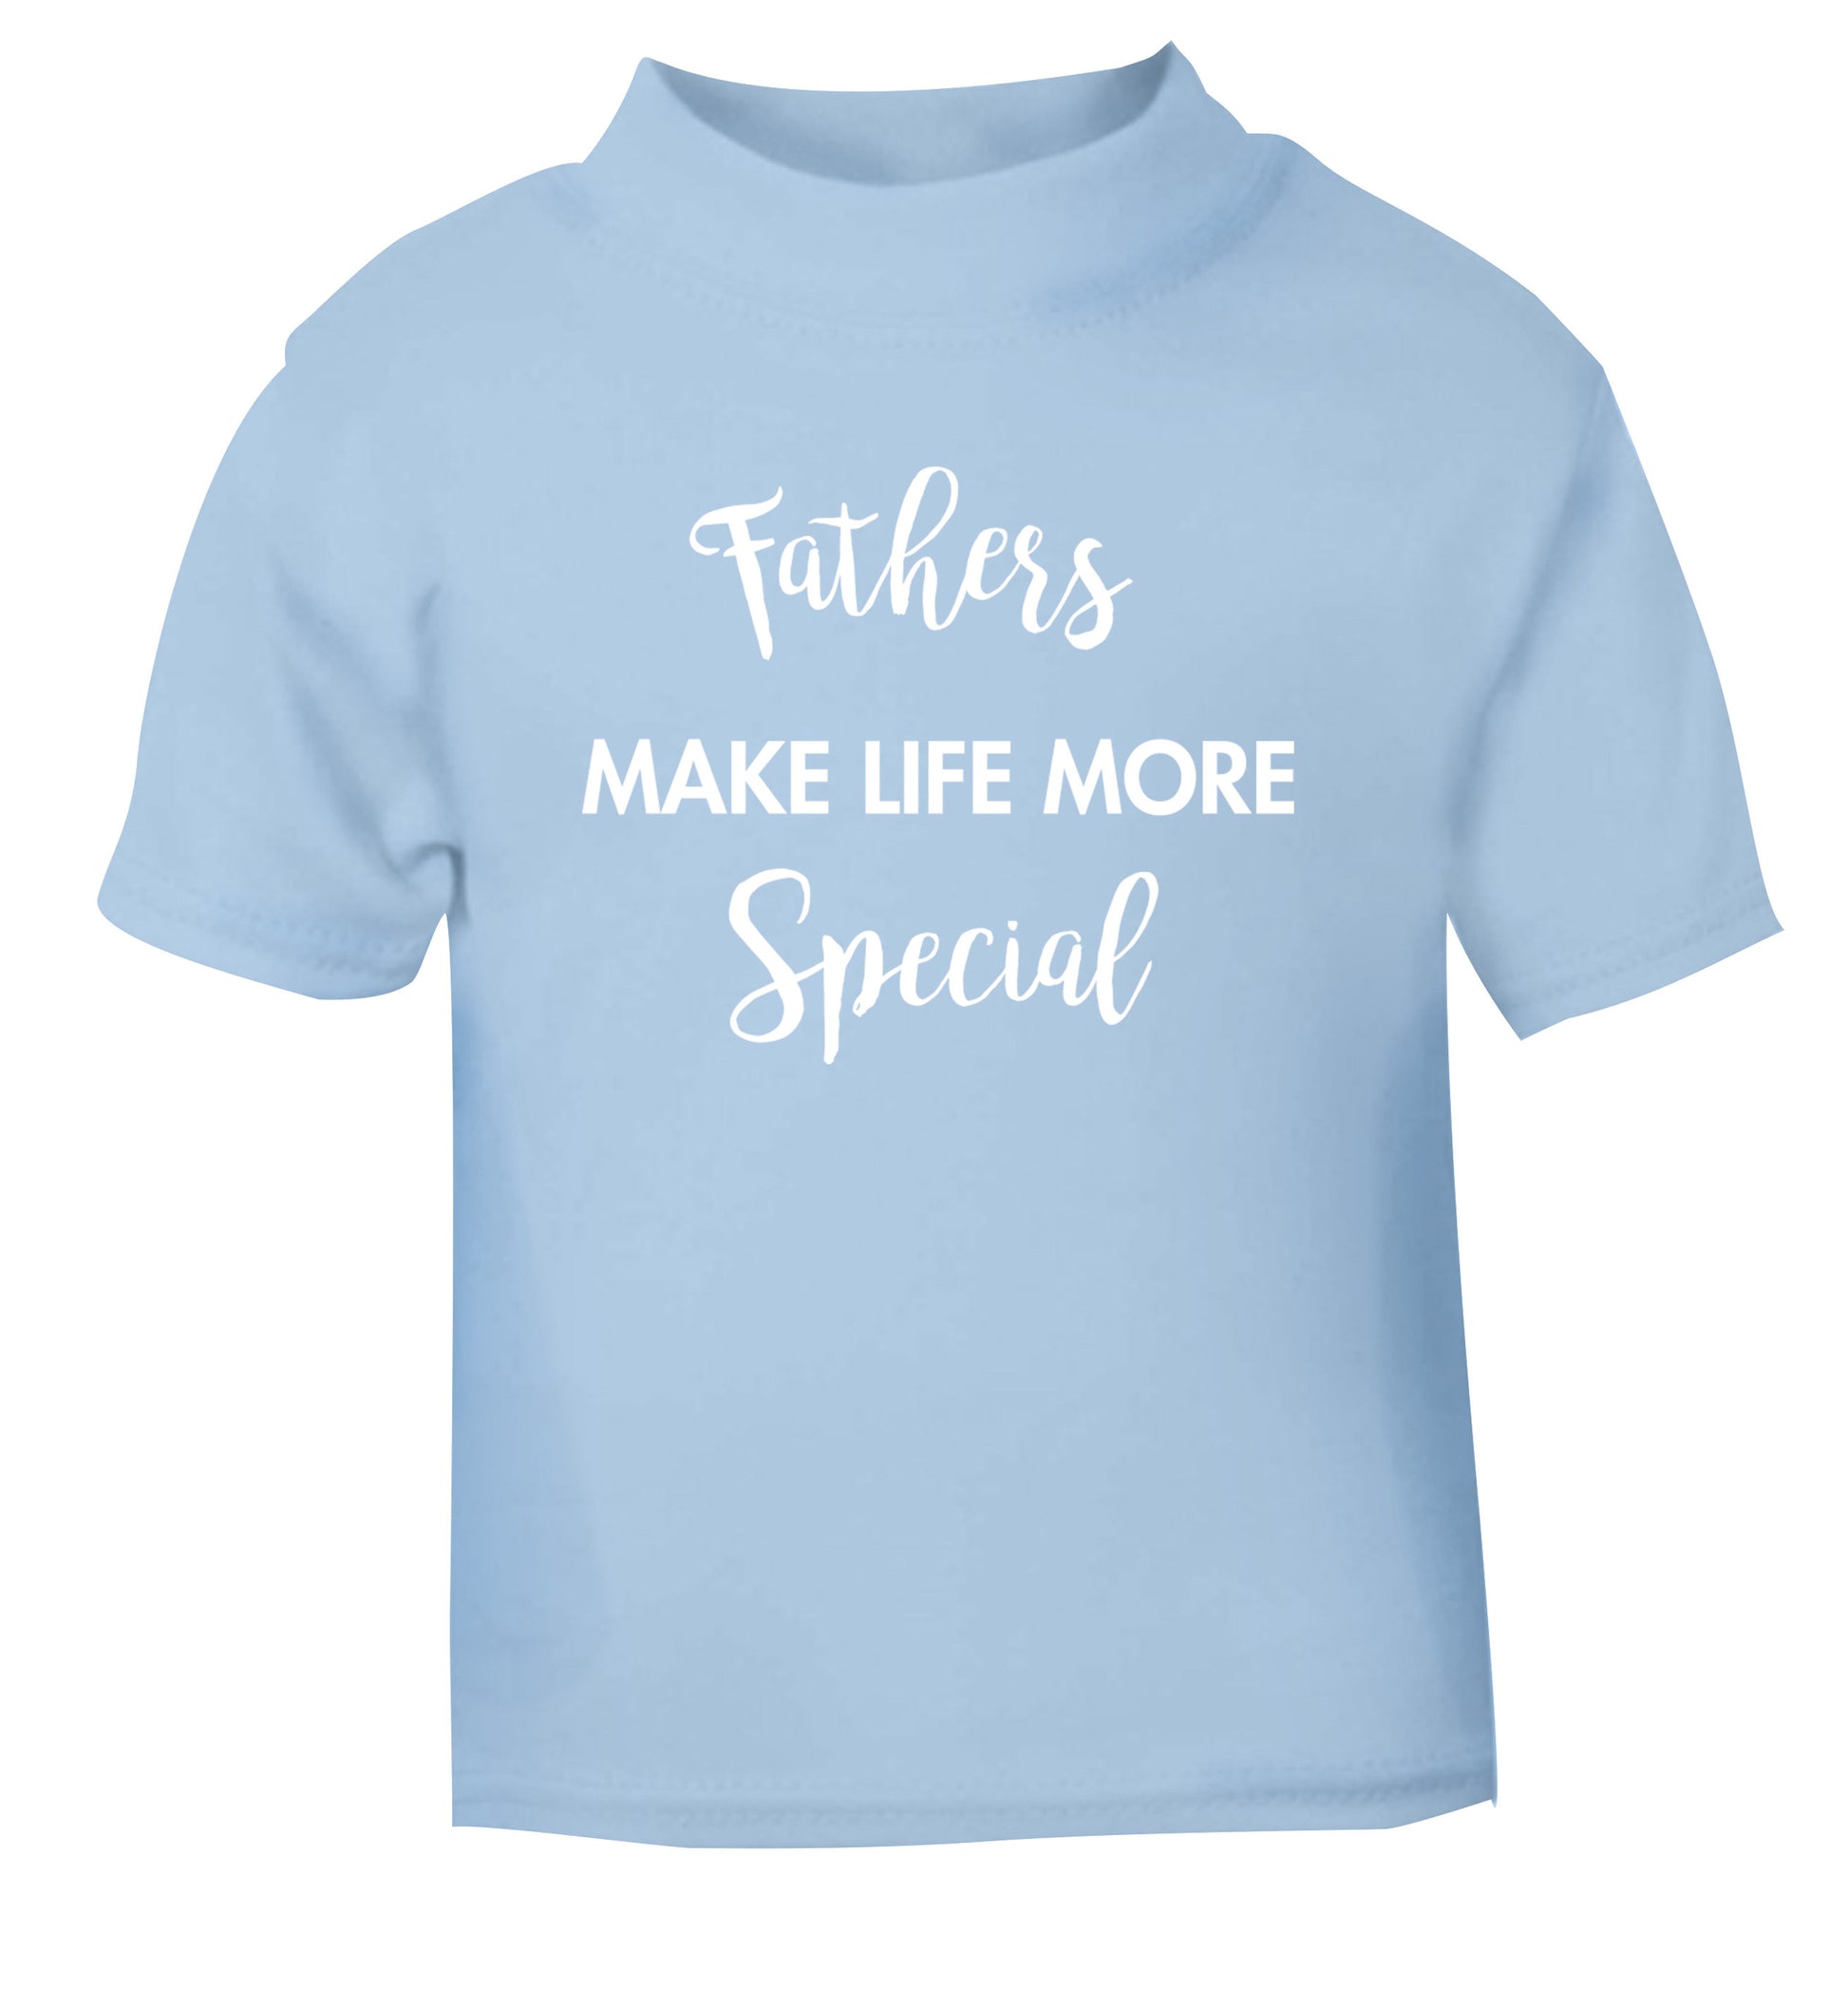 Fathers make life more special light blue Baby Toddler Tshirt 2 Years